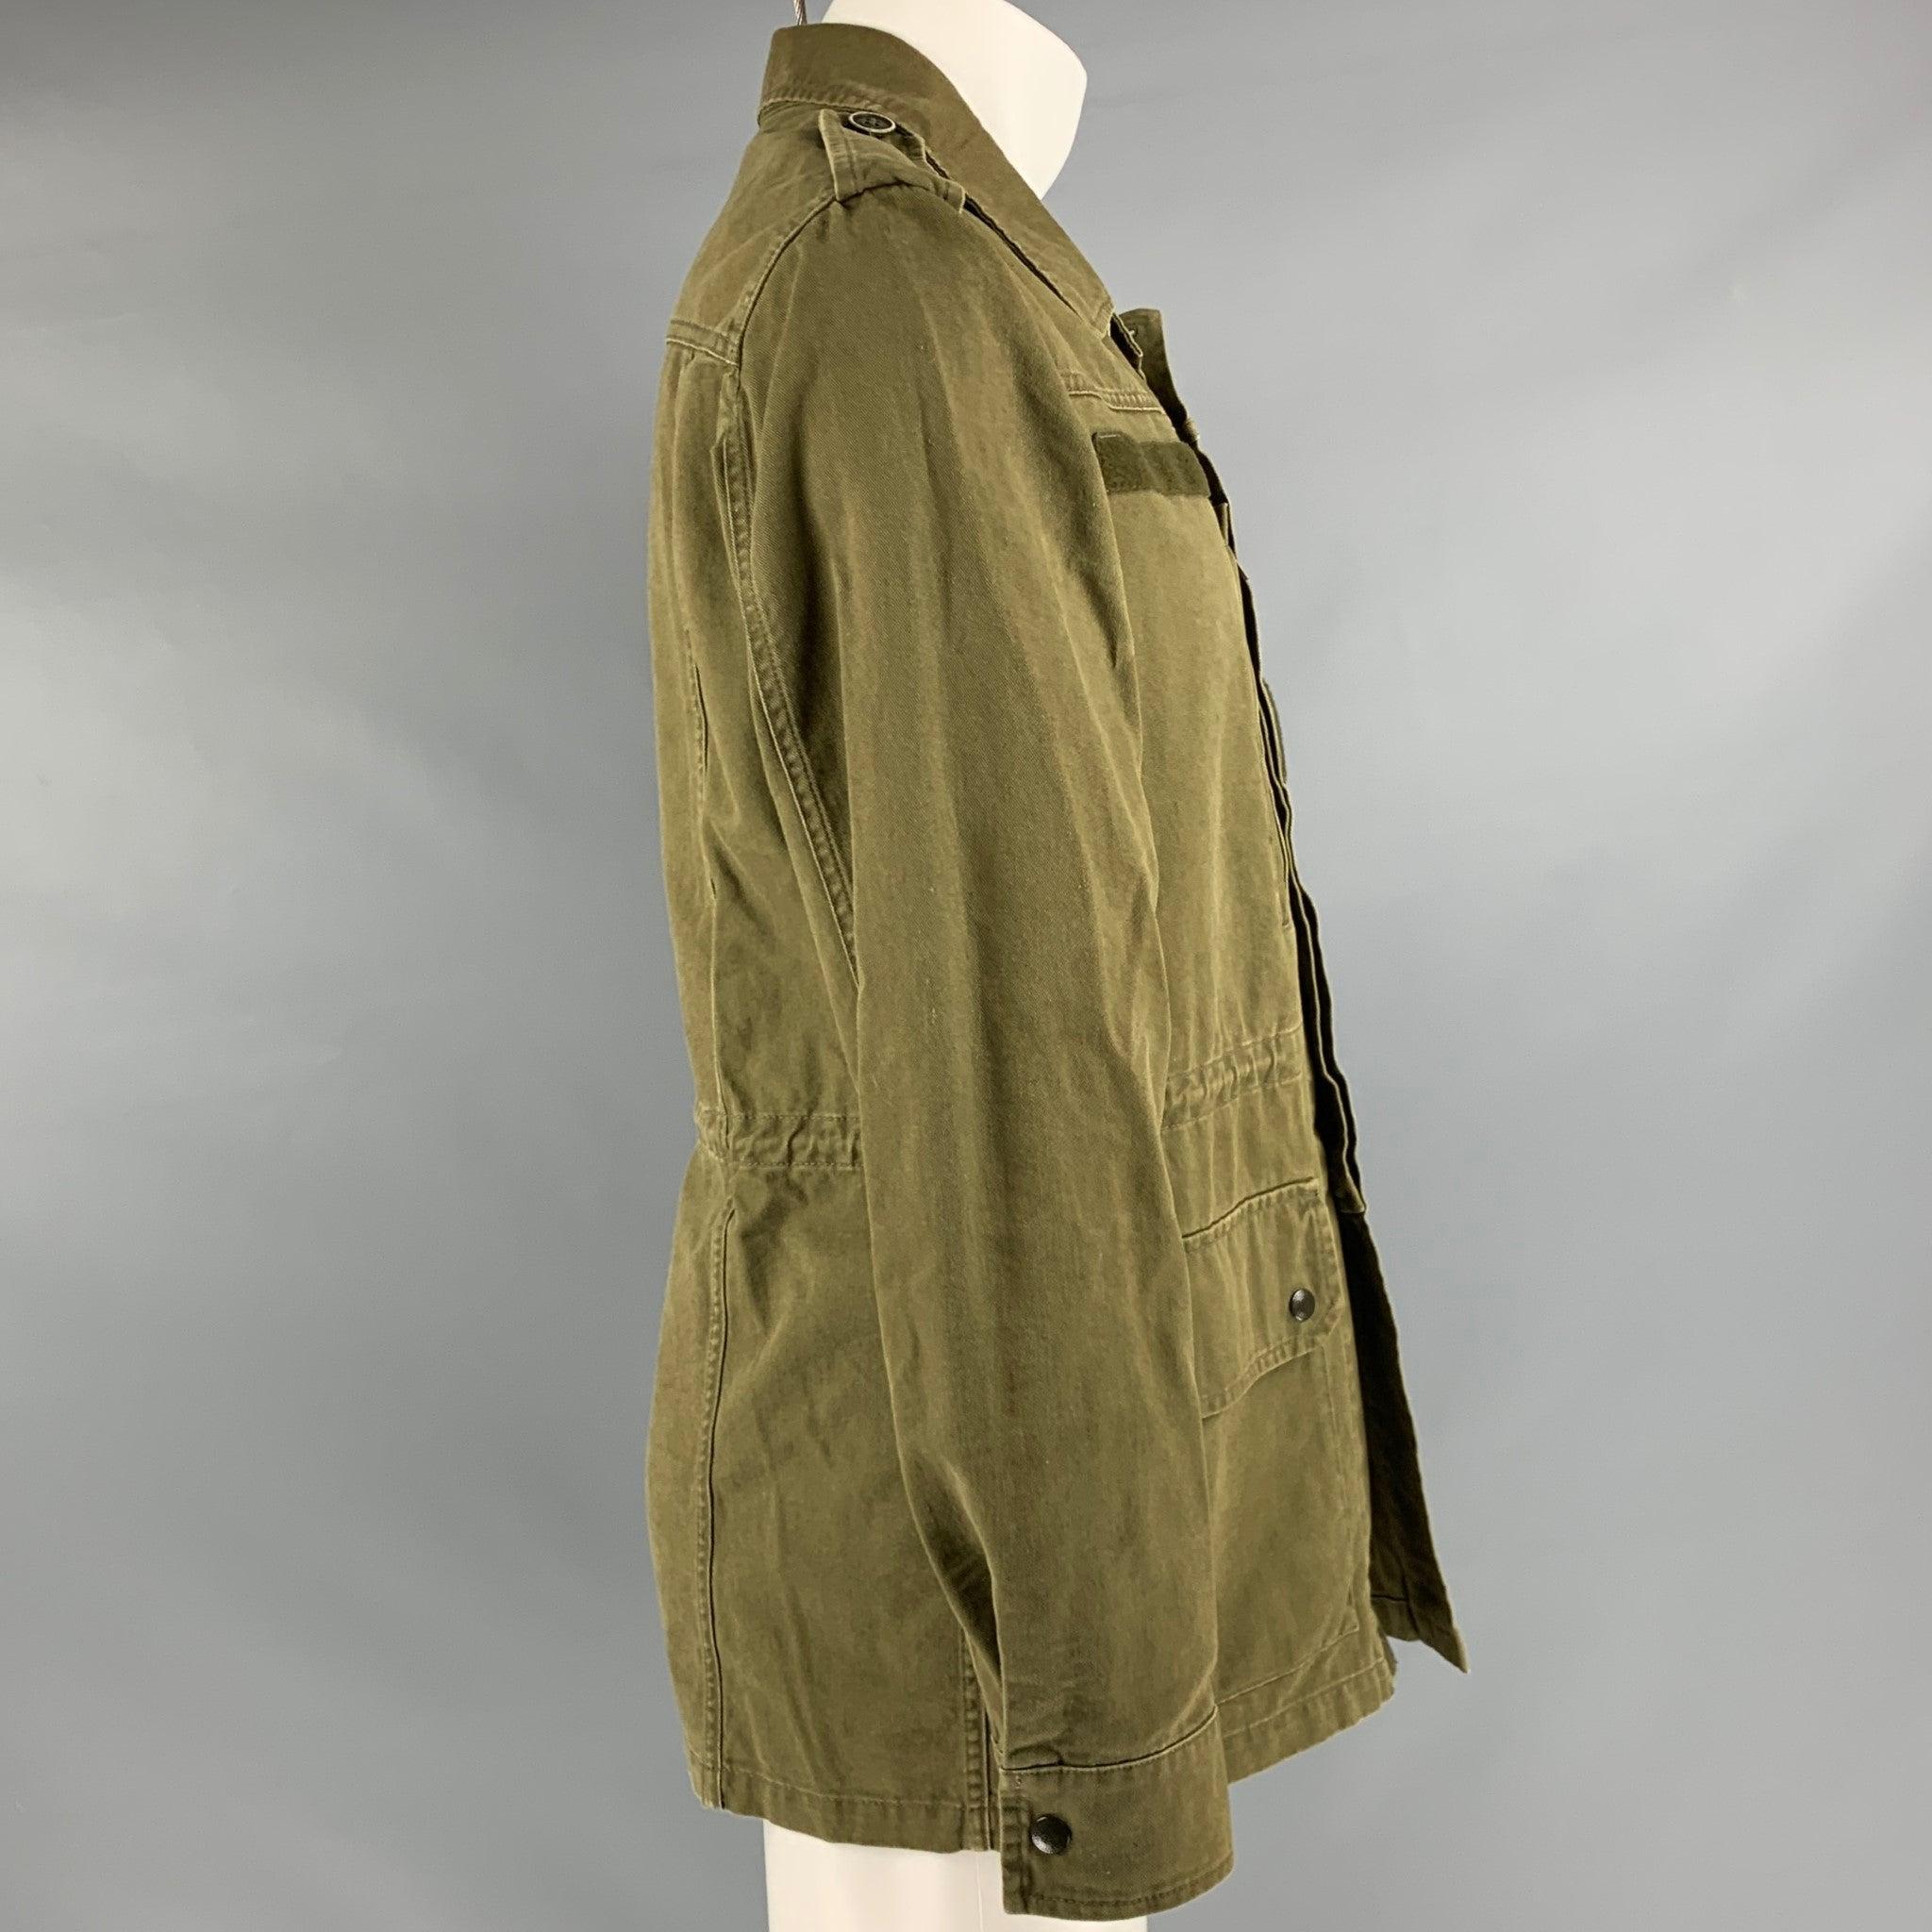 SAINT LAURENT SS2019 by Anthony Vaccarelo
jacket in a khaki cotton ramie blend fabric featuring a utility style, four pockets, and hidden button closure. Made in Italy.Excellent Pre-Owned Condition. 

Marked:   48 

Measurements: 
 
Shoulder: 18.5